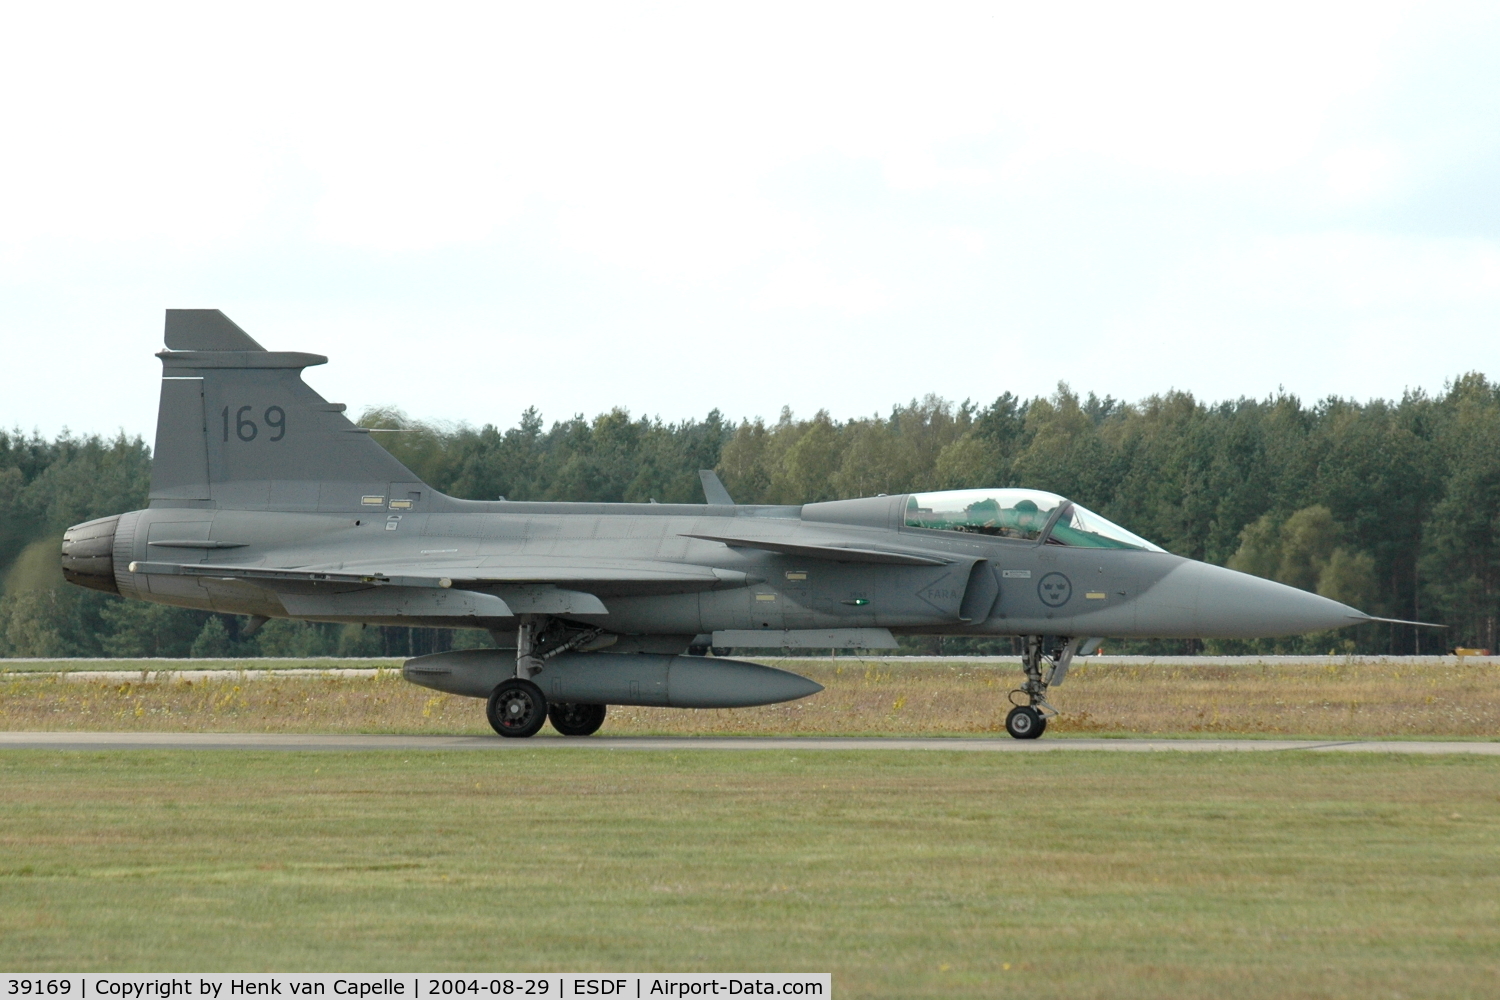 39169, Saab JAS-39A Gripen C/N 39-169, Saab JAS39A Gripen fighter of the Swedish Air Force at Ronneby Air Base, 2004.